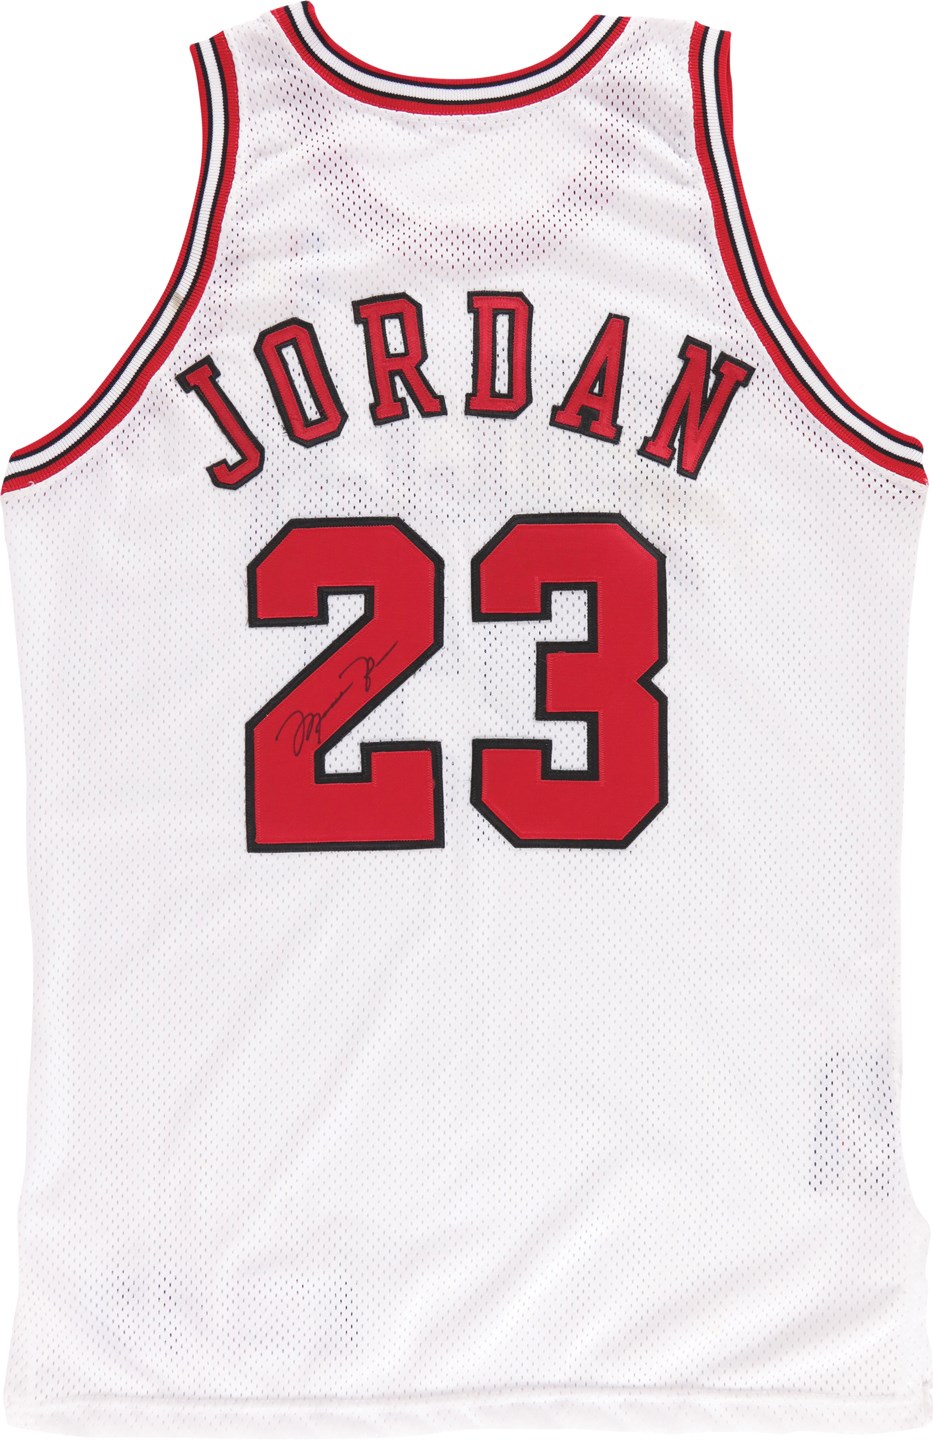 1995-96 Michael Jordan Chicago Bulls Signed Game Worn Jersey Sourced from Nick Anderson (JSA)